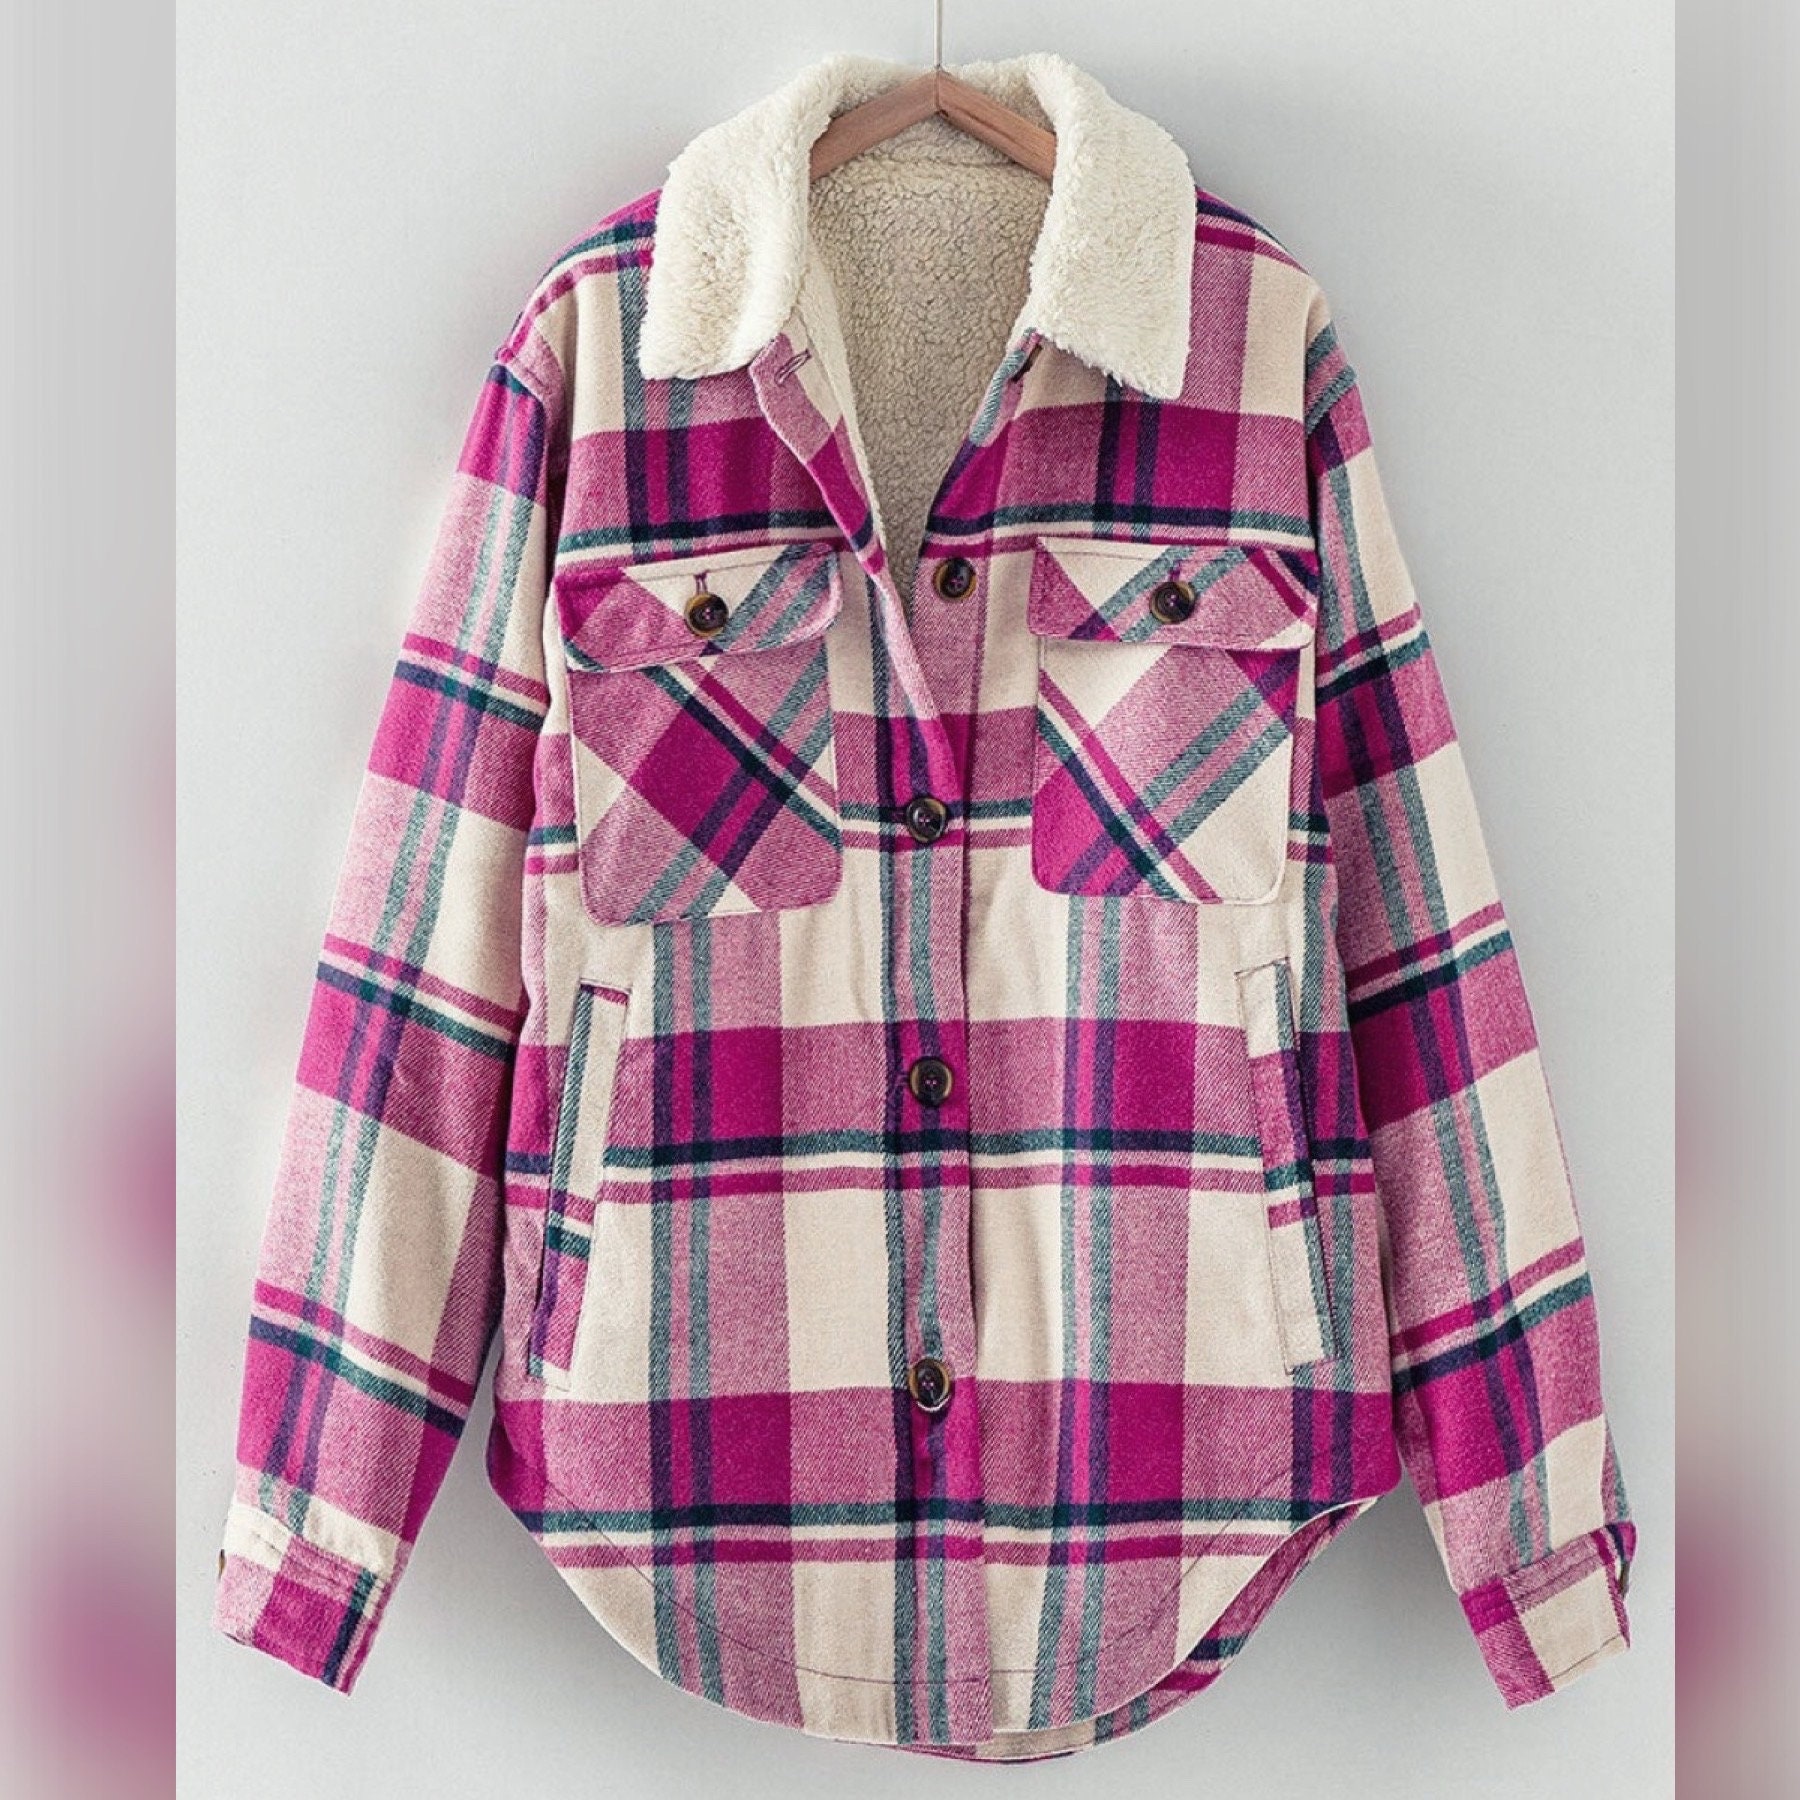 Buy Oversized Plaid Shacket With Sherpa Lining, Warm, Cozy and Versatile,  Sherpa Collar, Side Pockets, Flannel Shirt Jacket Holiday Gift for Her  Online in India 